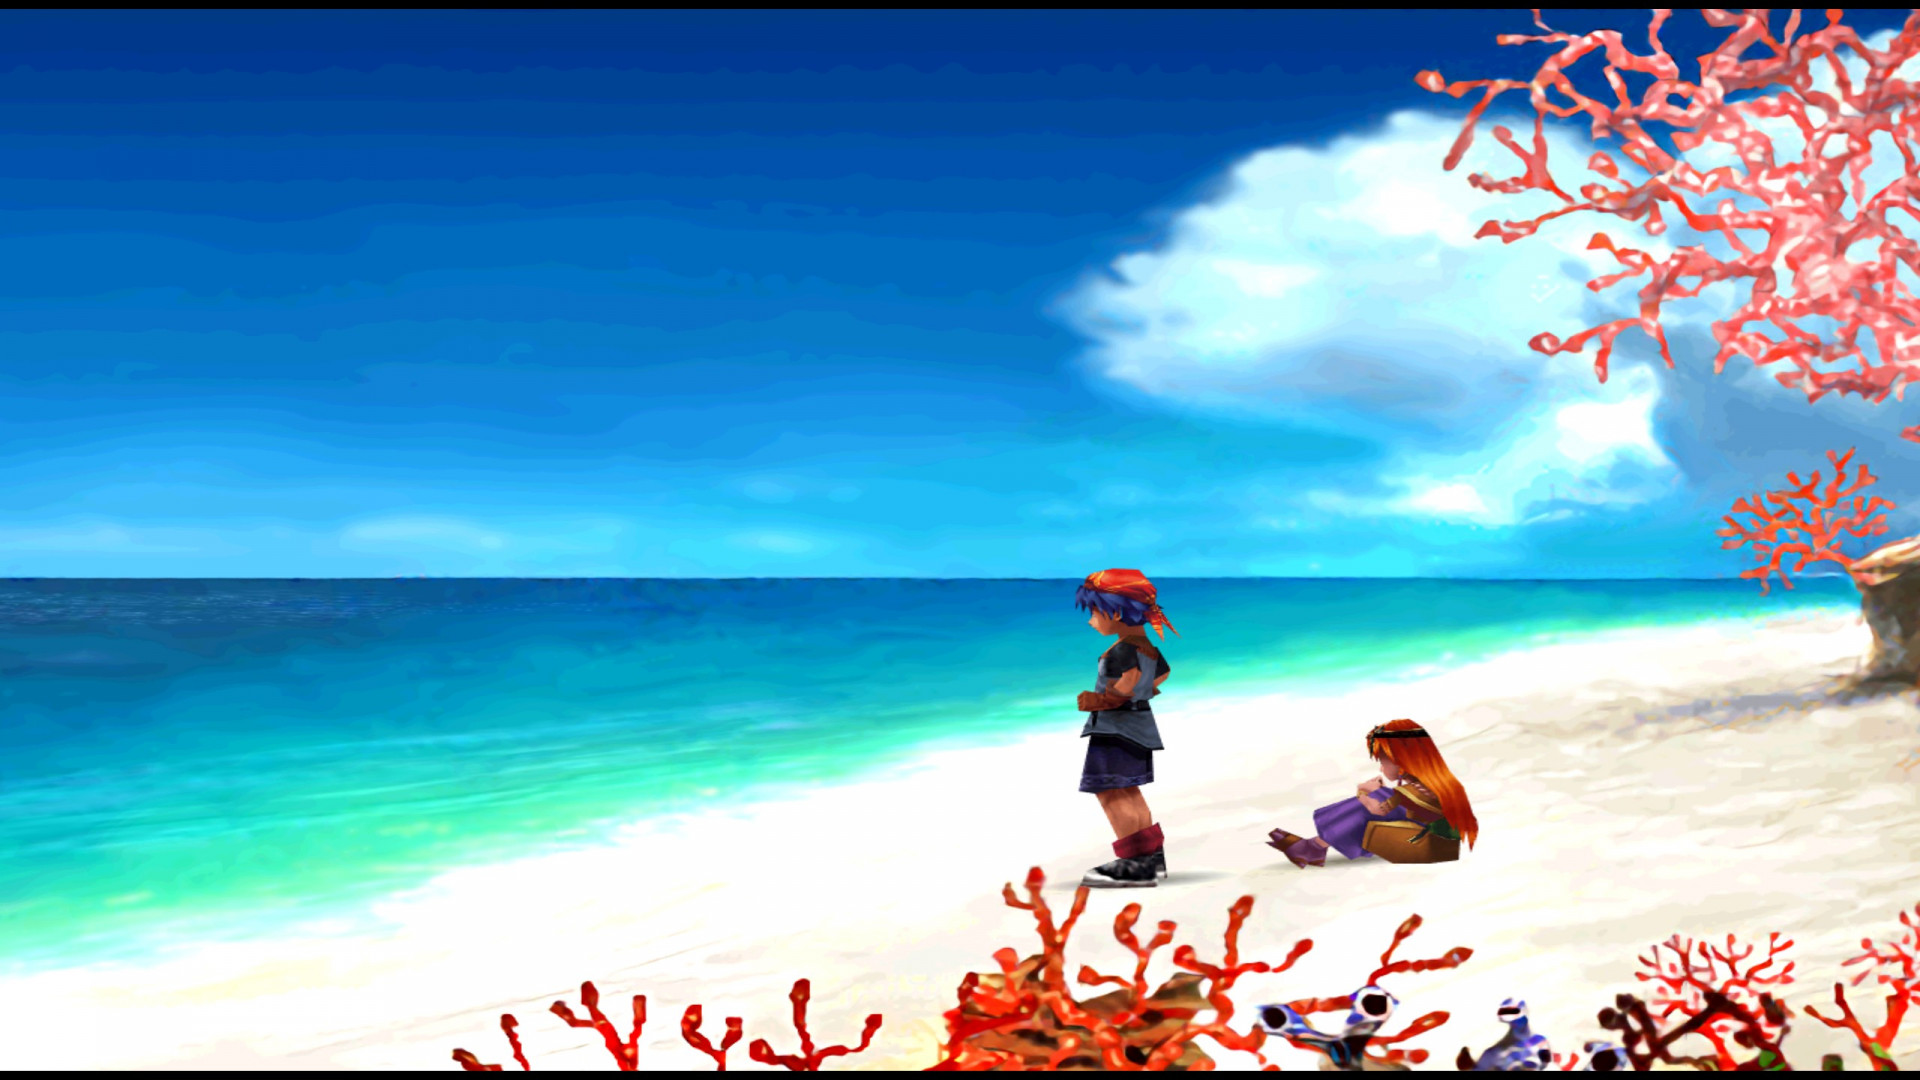 Chrono Cross: The Radical Dreamers Edition -- Is it worth it?